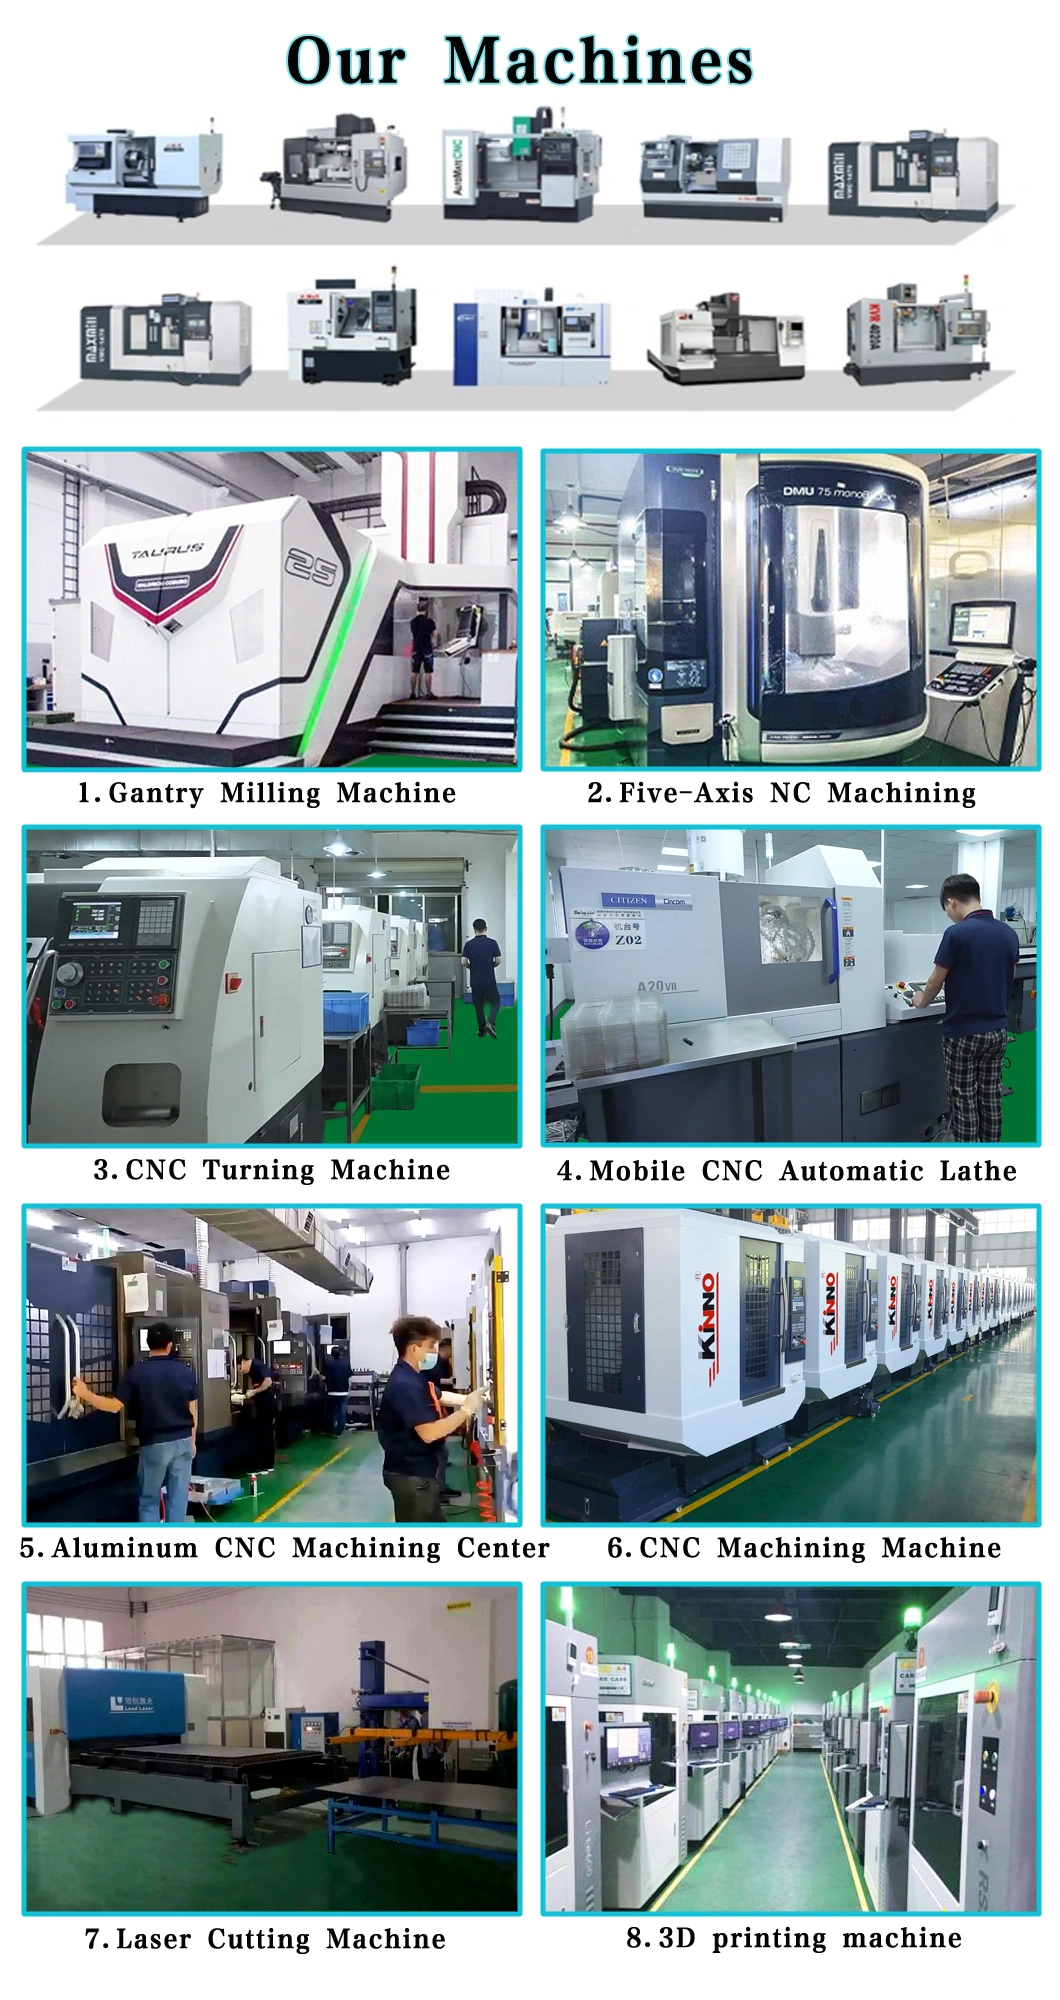 Sheet Metal Products Rapid Prototyping Metal Processing Machinery Parts POM Acrylic Processing CNC Milling